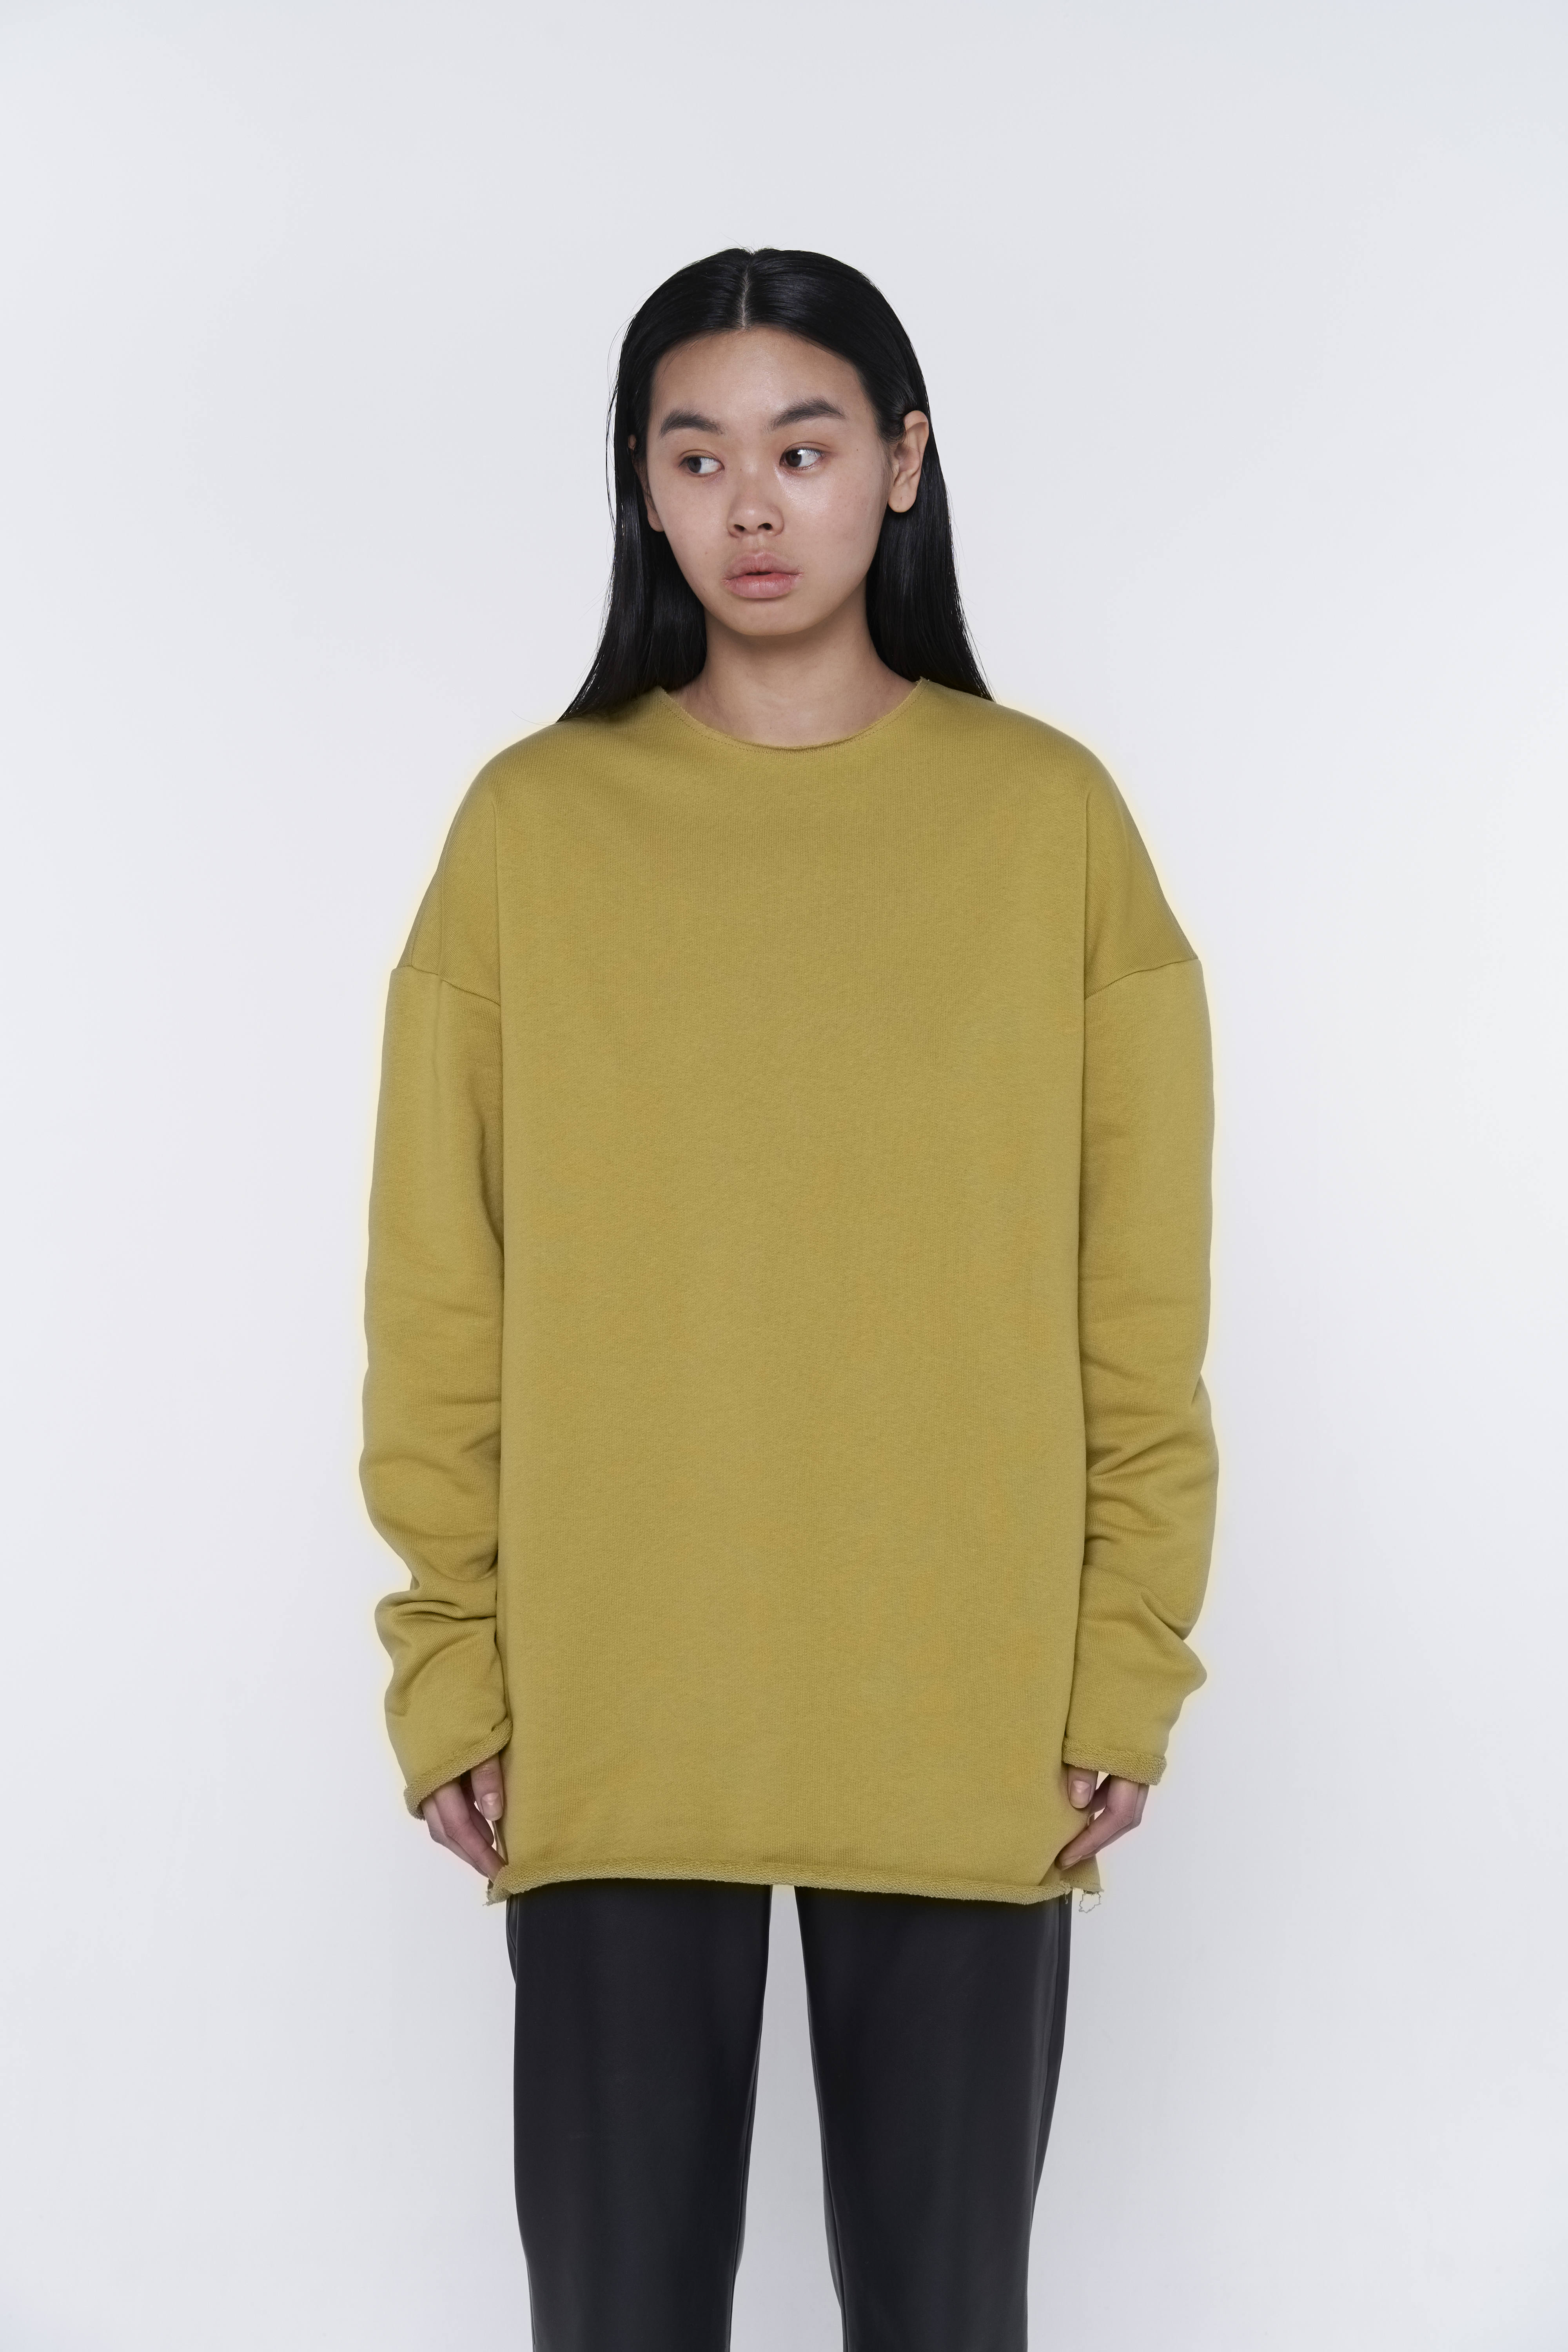 sweatshirt relax fit in olive color